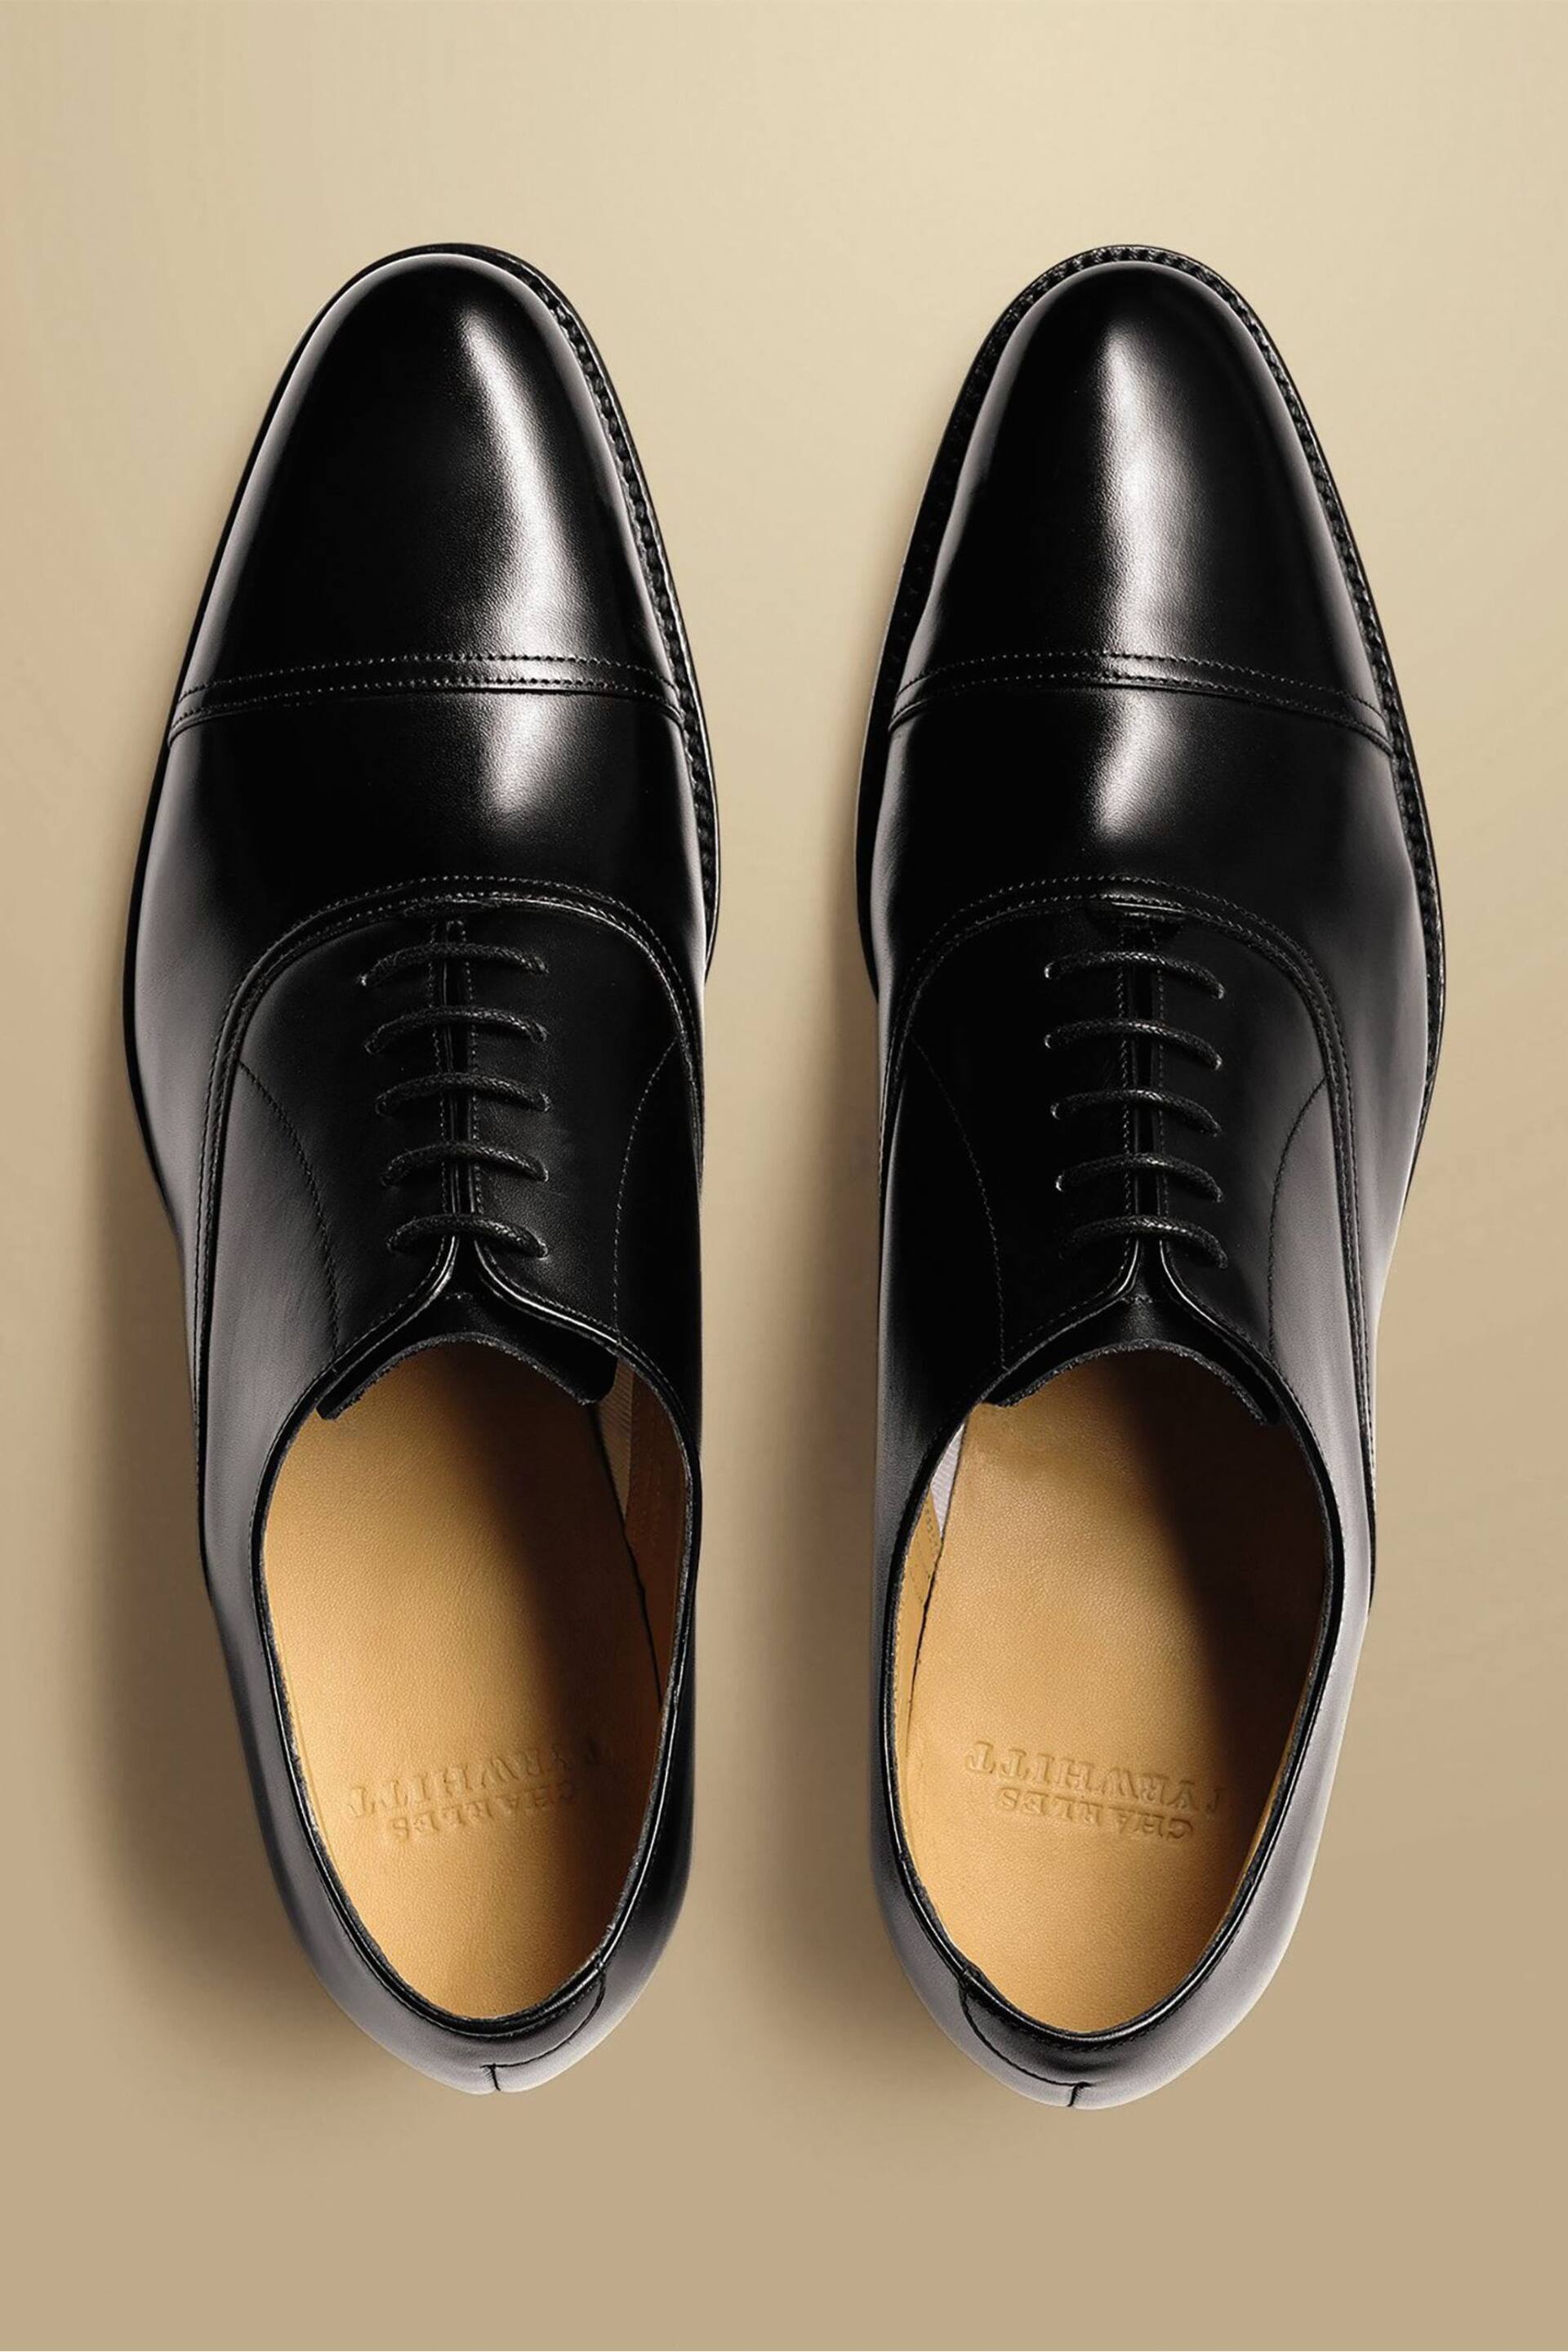 Charles Tyrwhitt Black Leather Oxford Shoes - Image 2 of 4